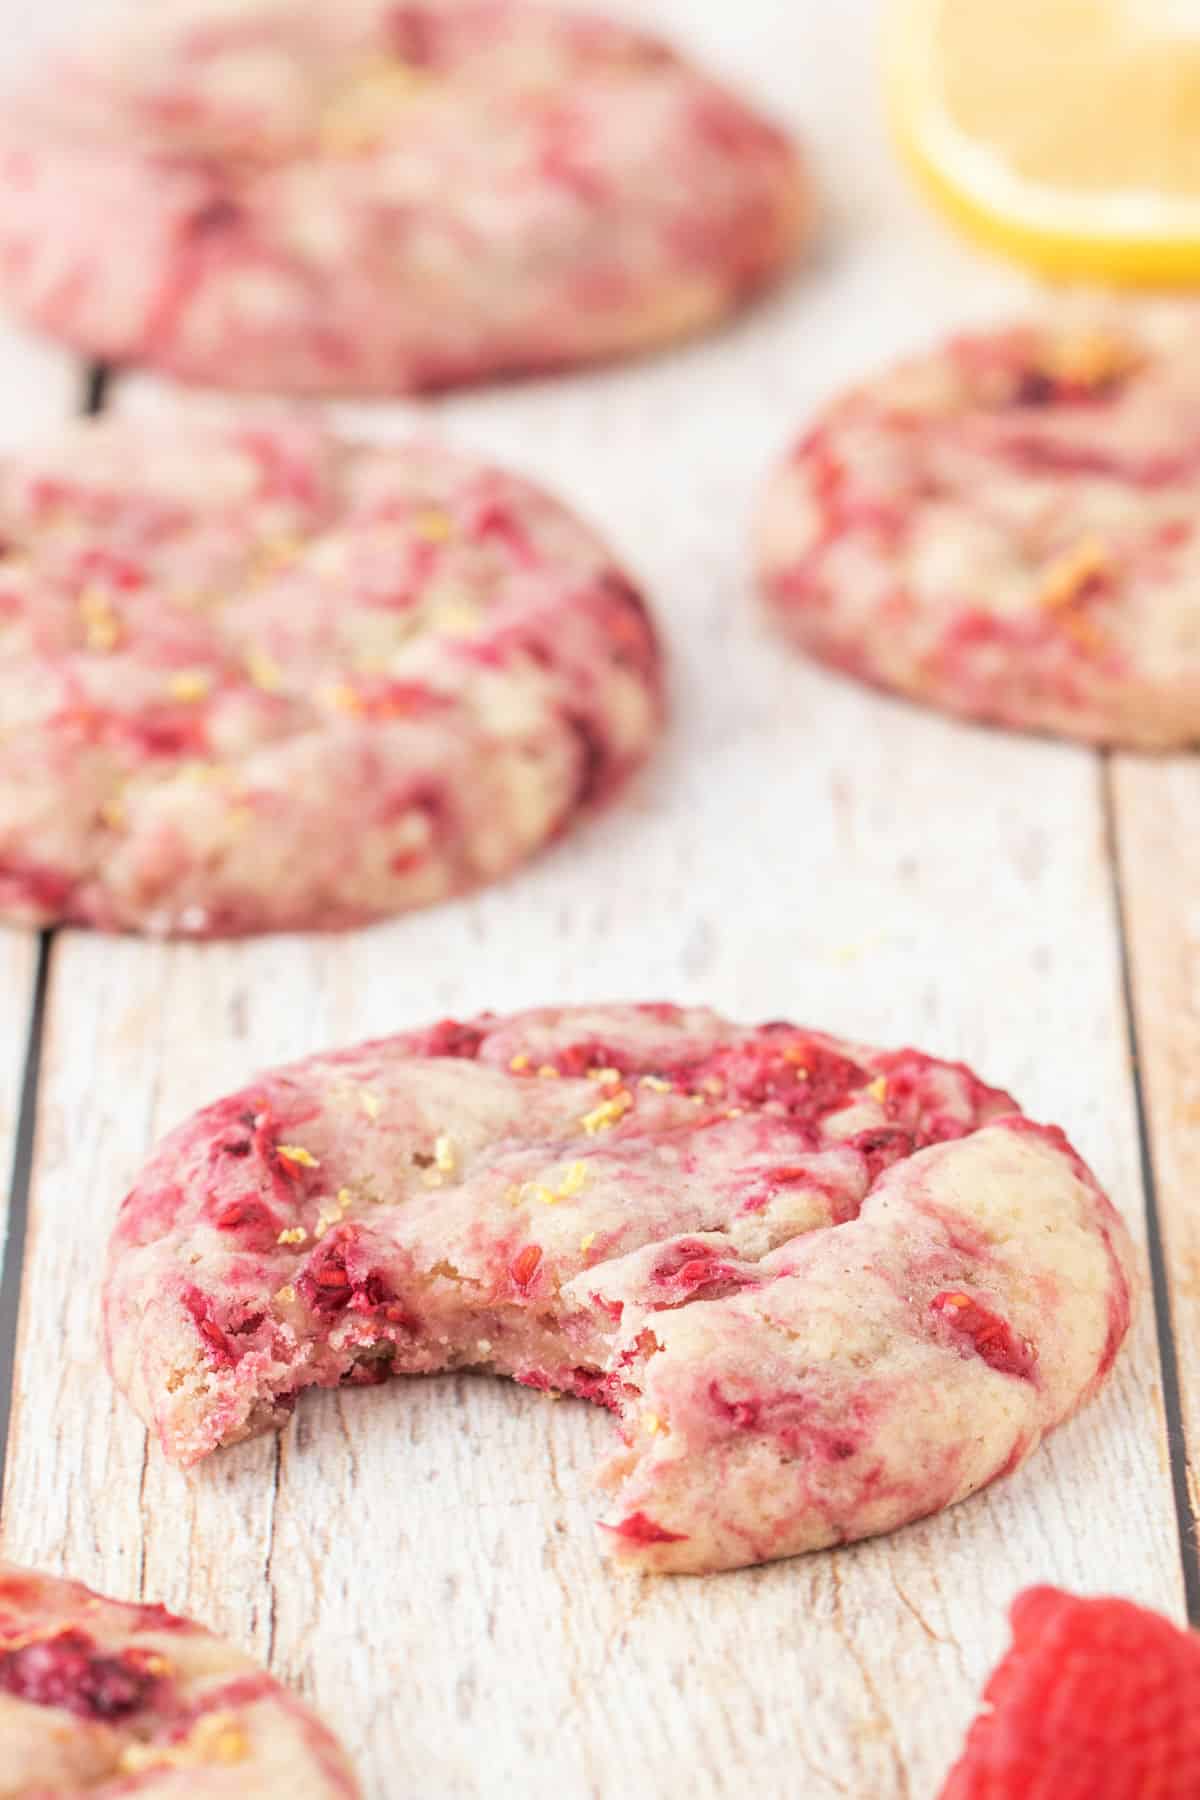 Raspberry cookie with a bite taken out.